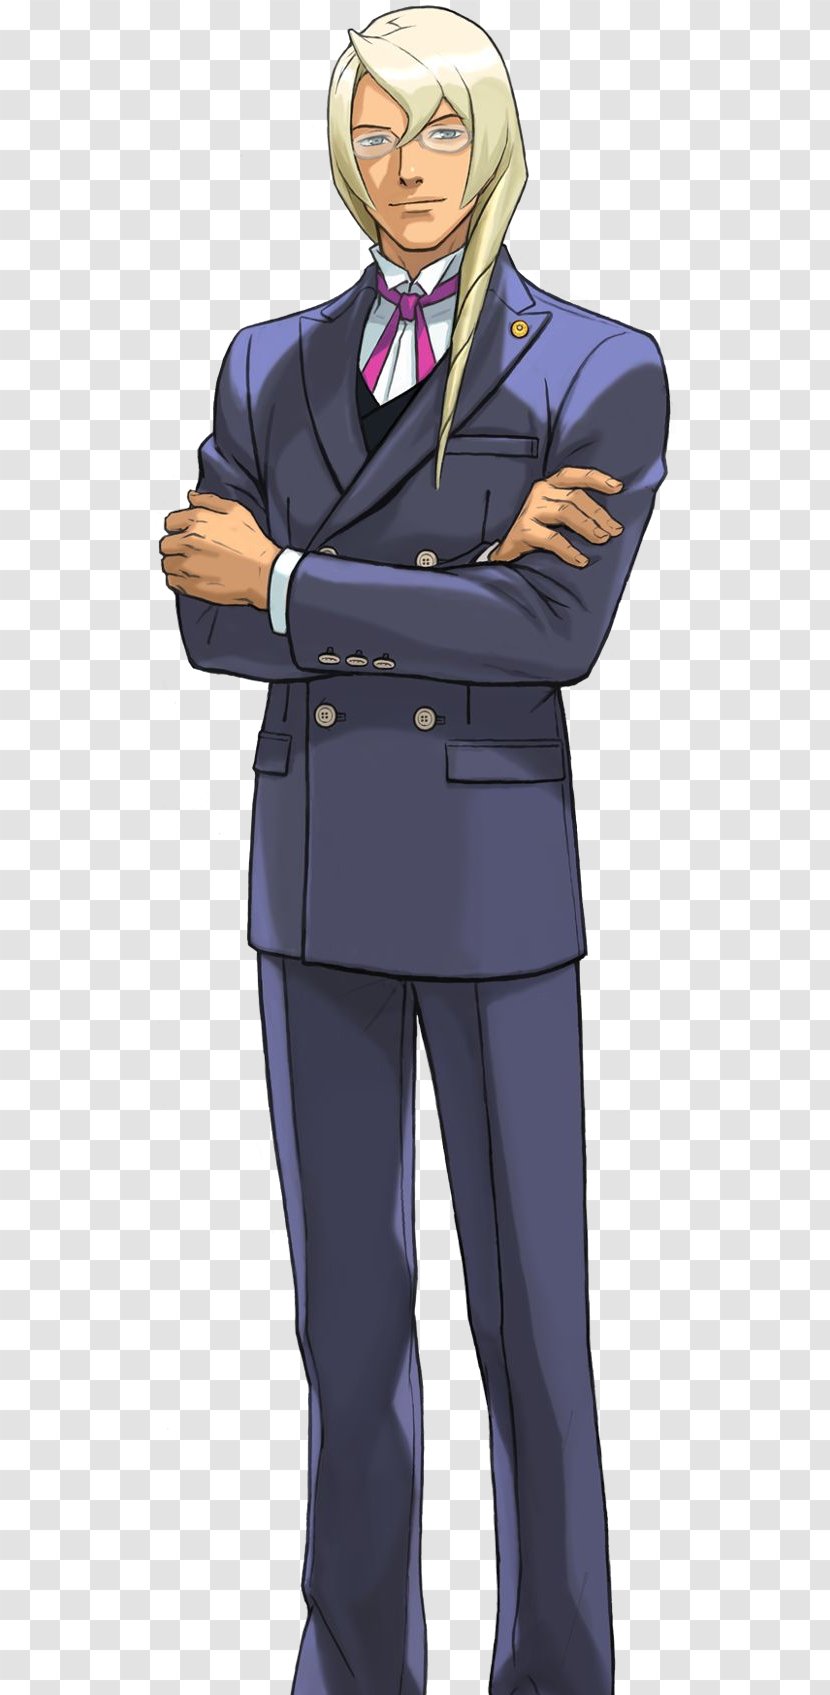 Apollo Justice: Ace Attorney Phoenix Wright: 6 Video Game - Cartoon - Chalk Effect Transparent PNG